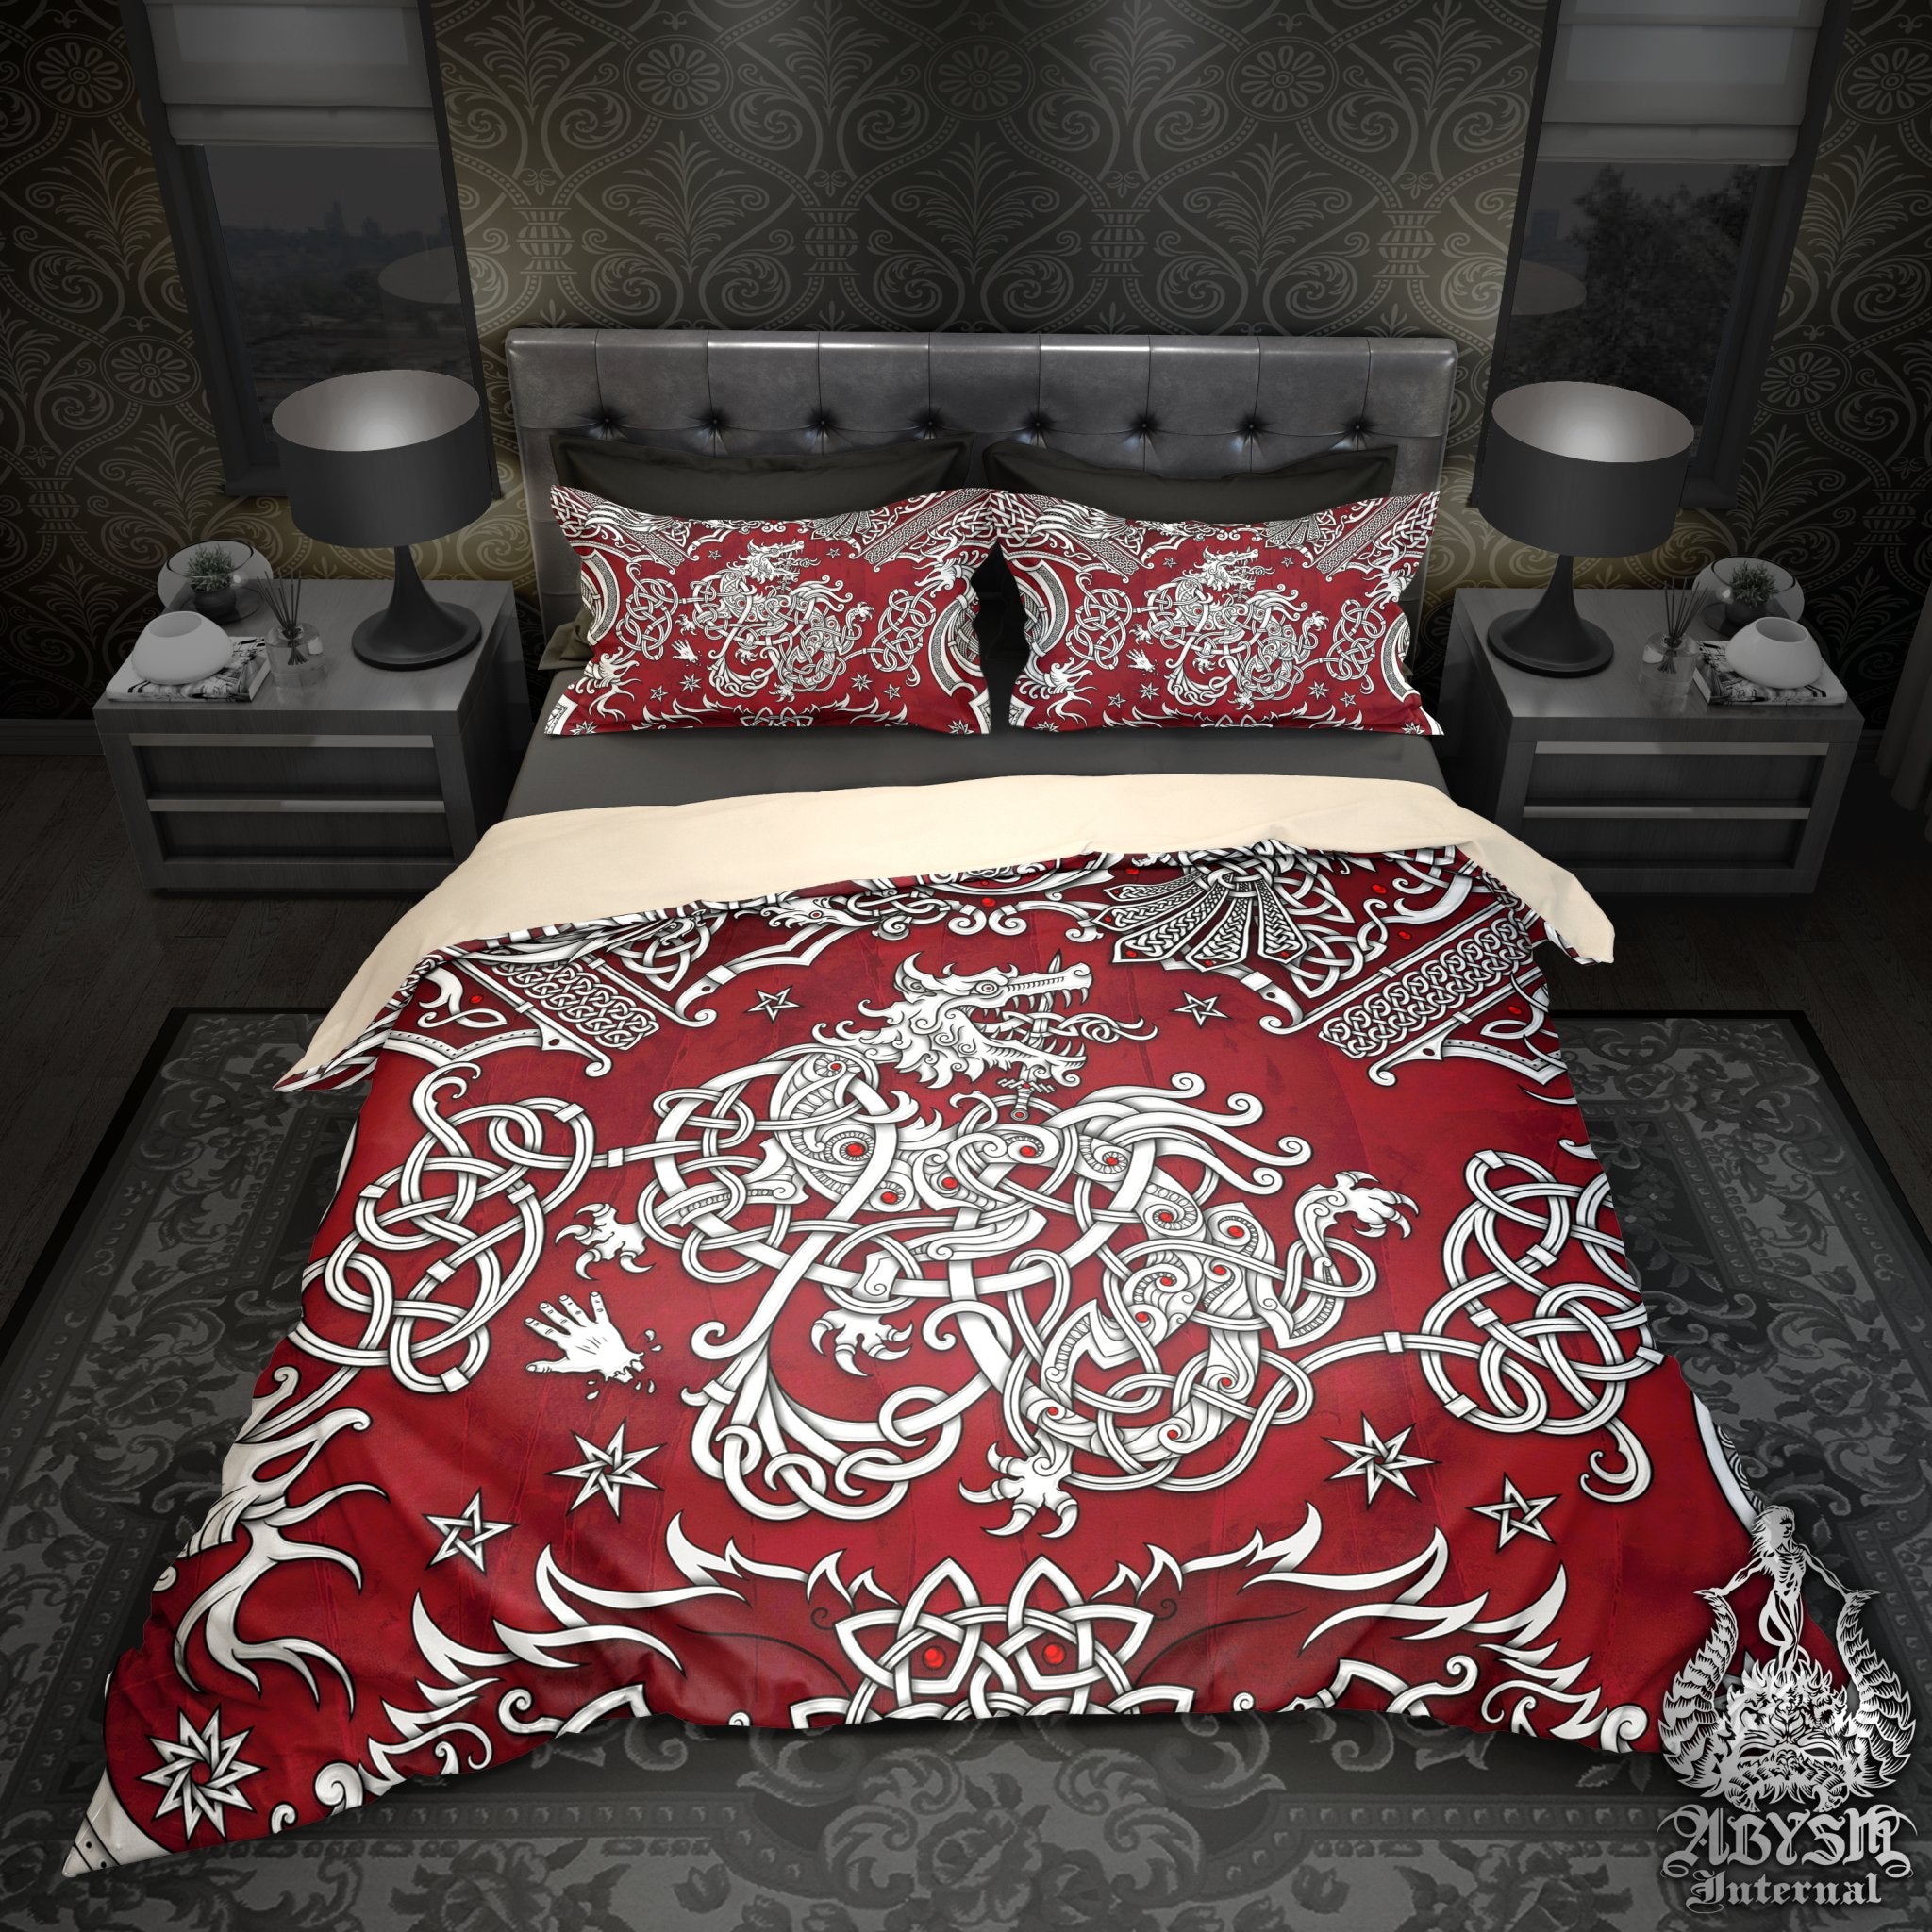 Viking Bedding Set, Comforter or Duvet, Norse Wolf Bed Cover and Bedroom Decor, Viking Art Print, King, Queen & Twin Size - White and 3 Colors: Red, Black, Blue - Abysm Internal